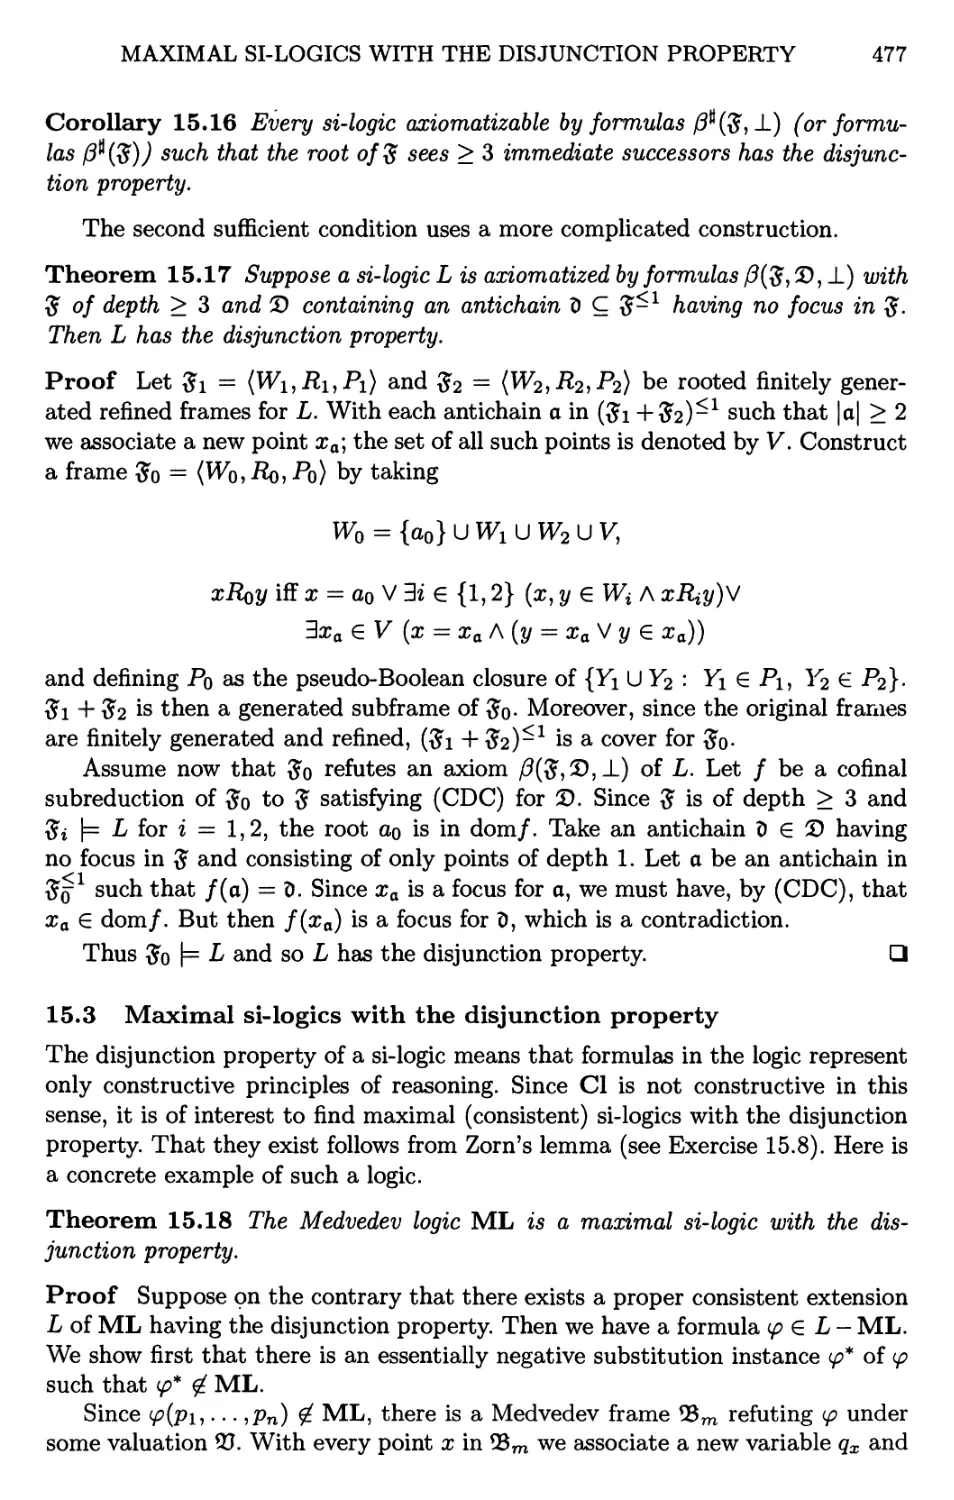 15.3 Maximal si-logics with the disjunction property